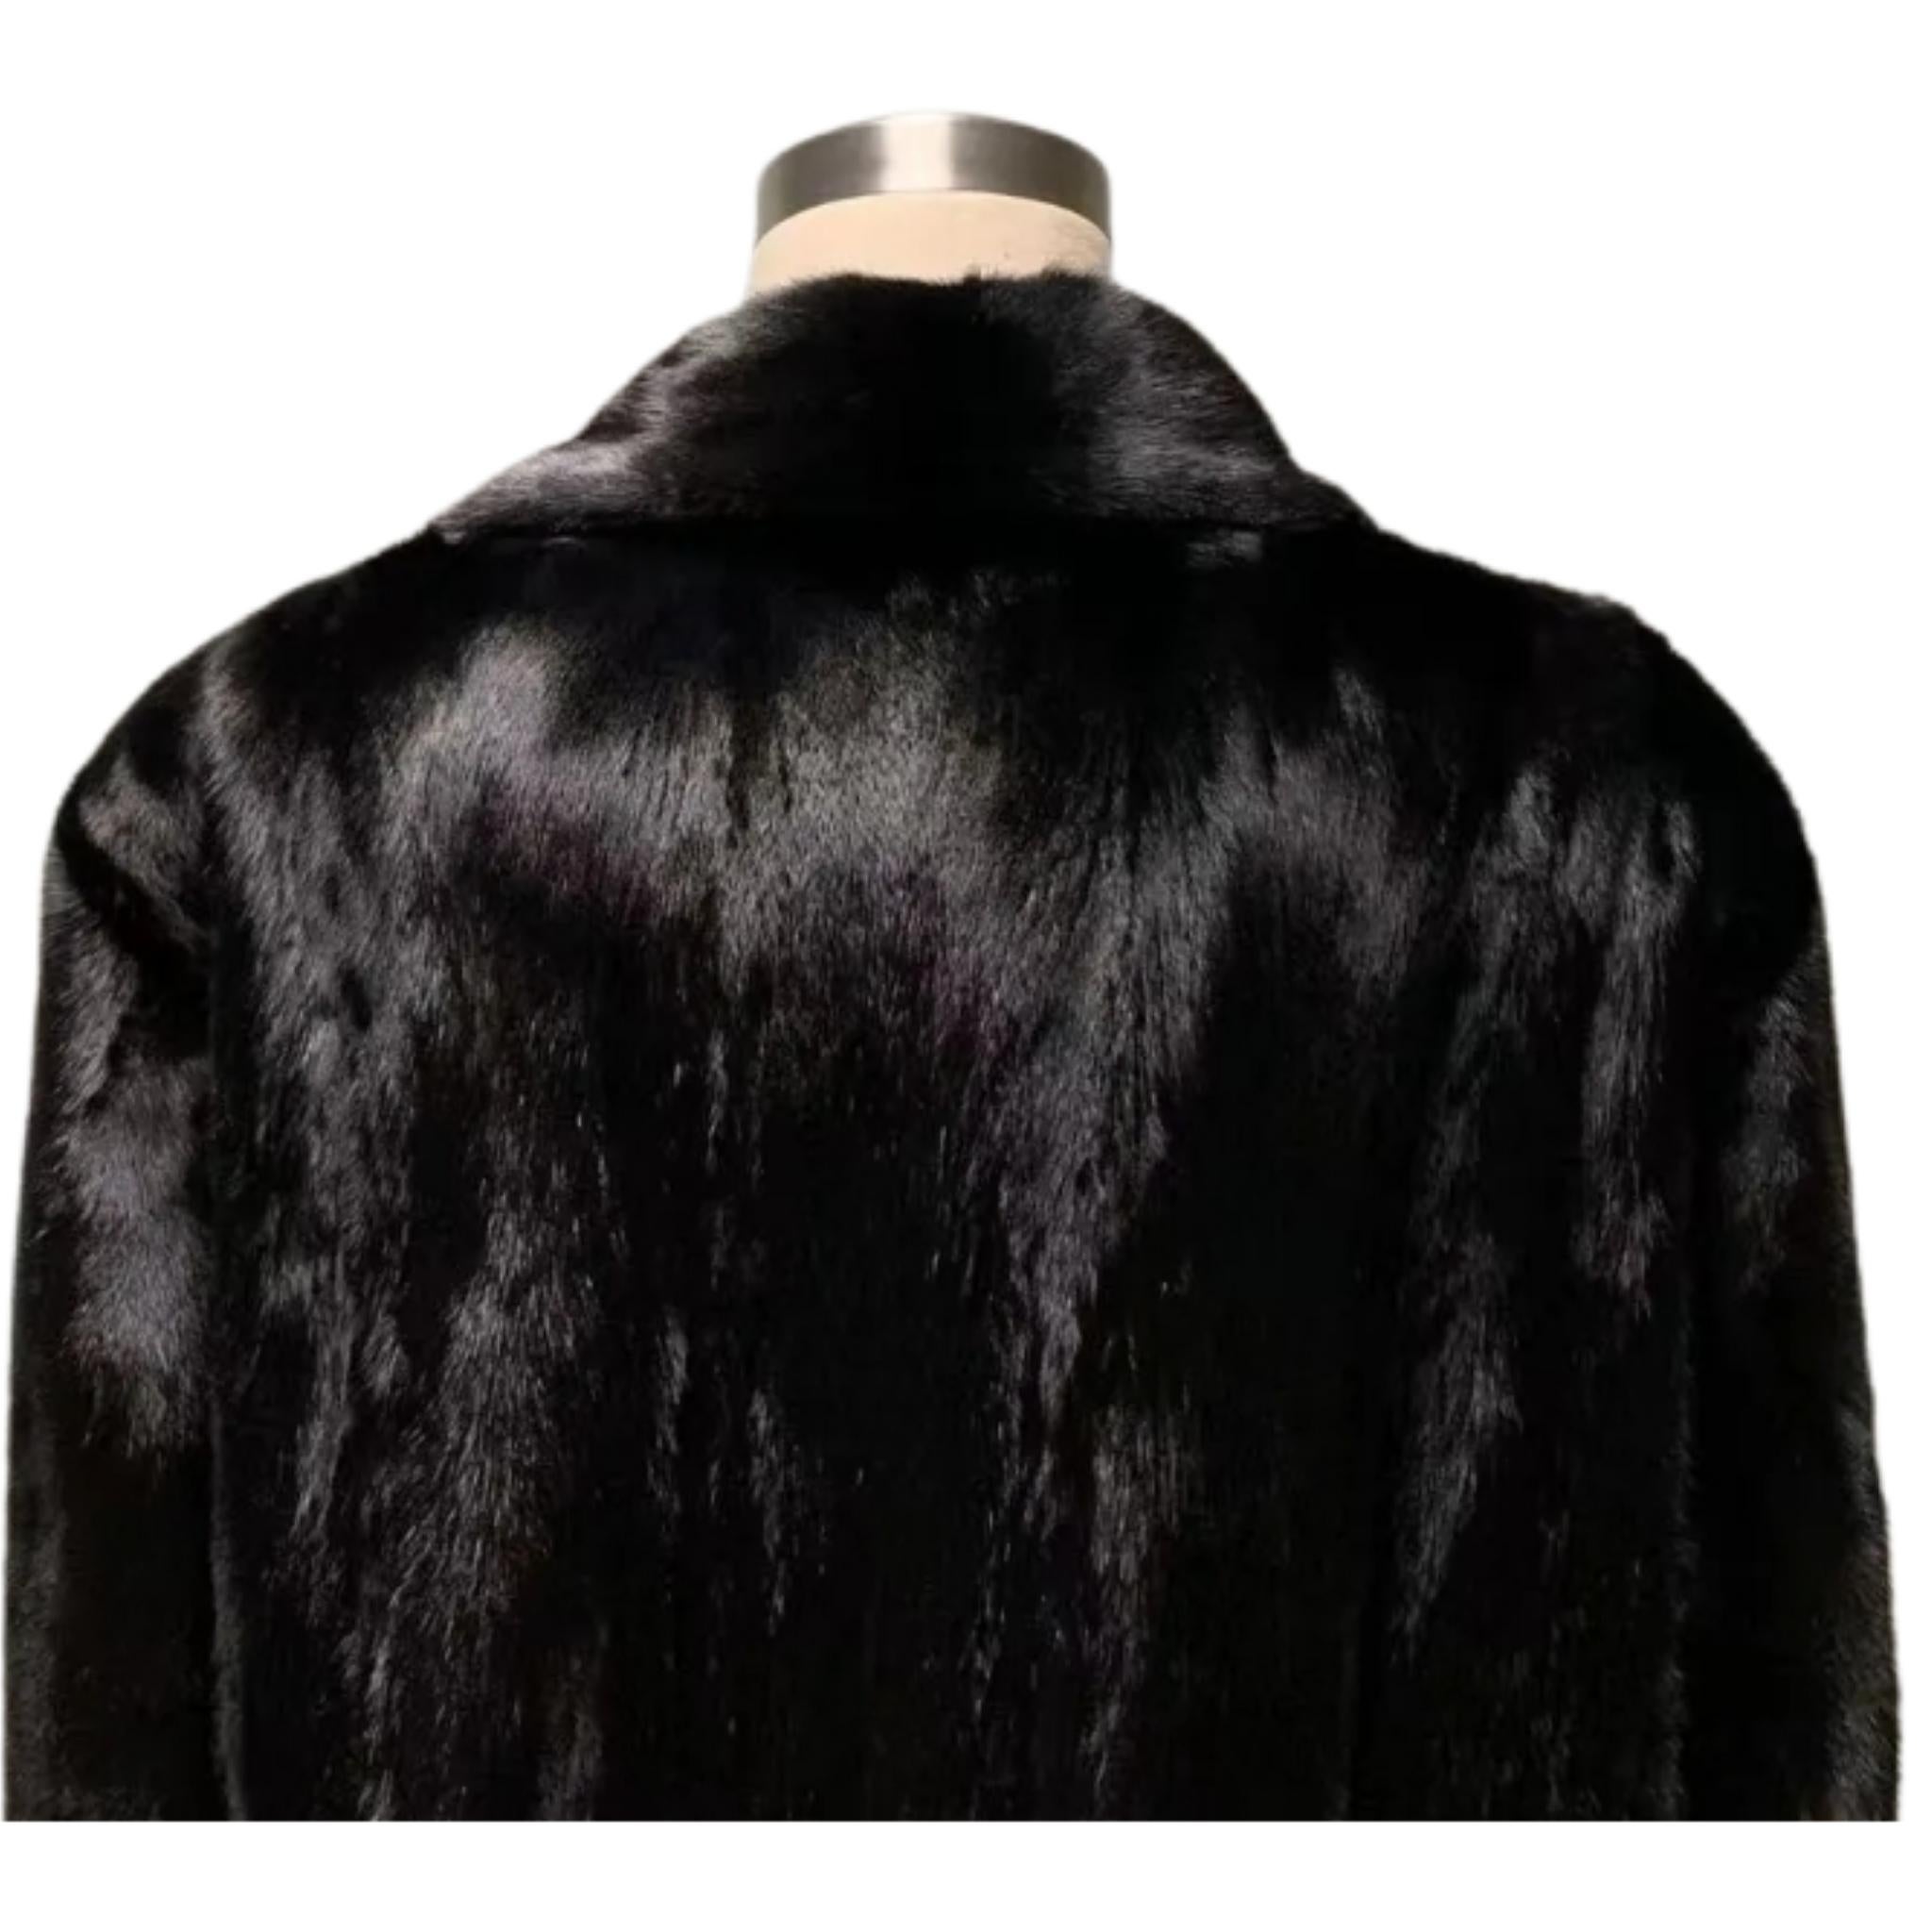 Brand new Big Tall Blackglama Men's mink fur coat parka jacket size 2 XL In New Condition For Sale In Montreal, Quebec